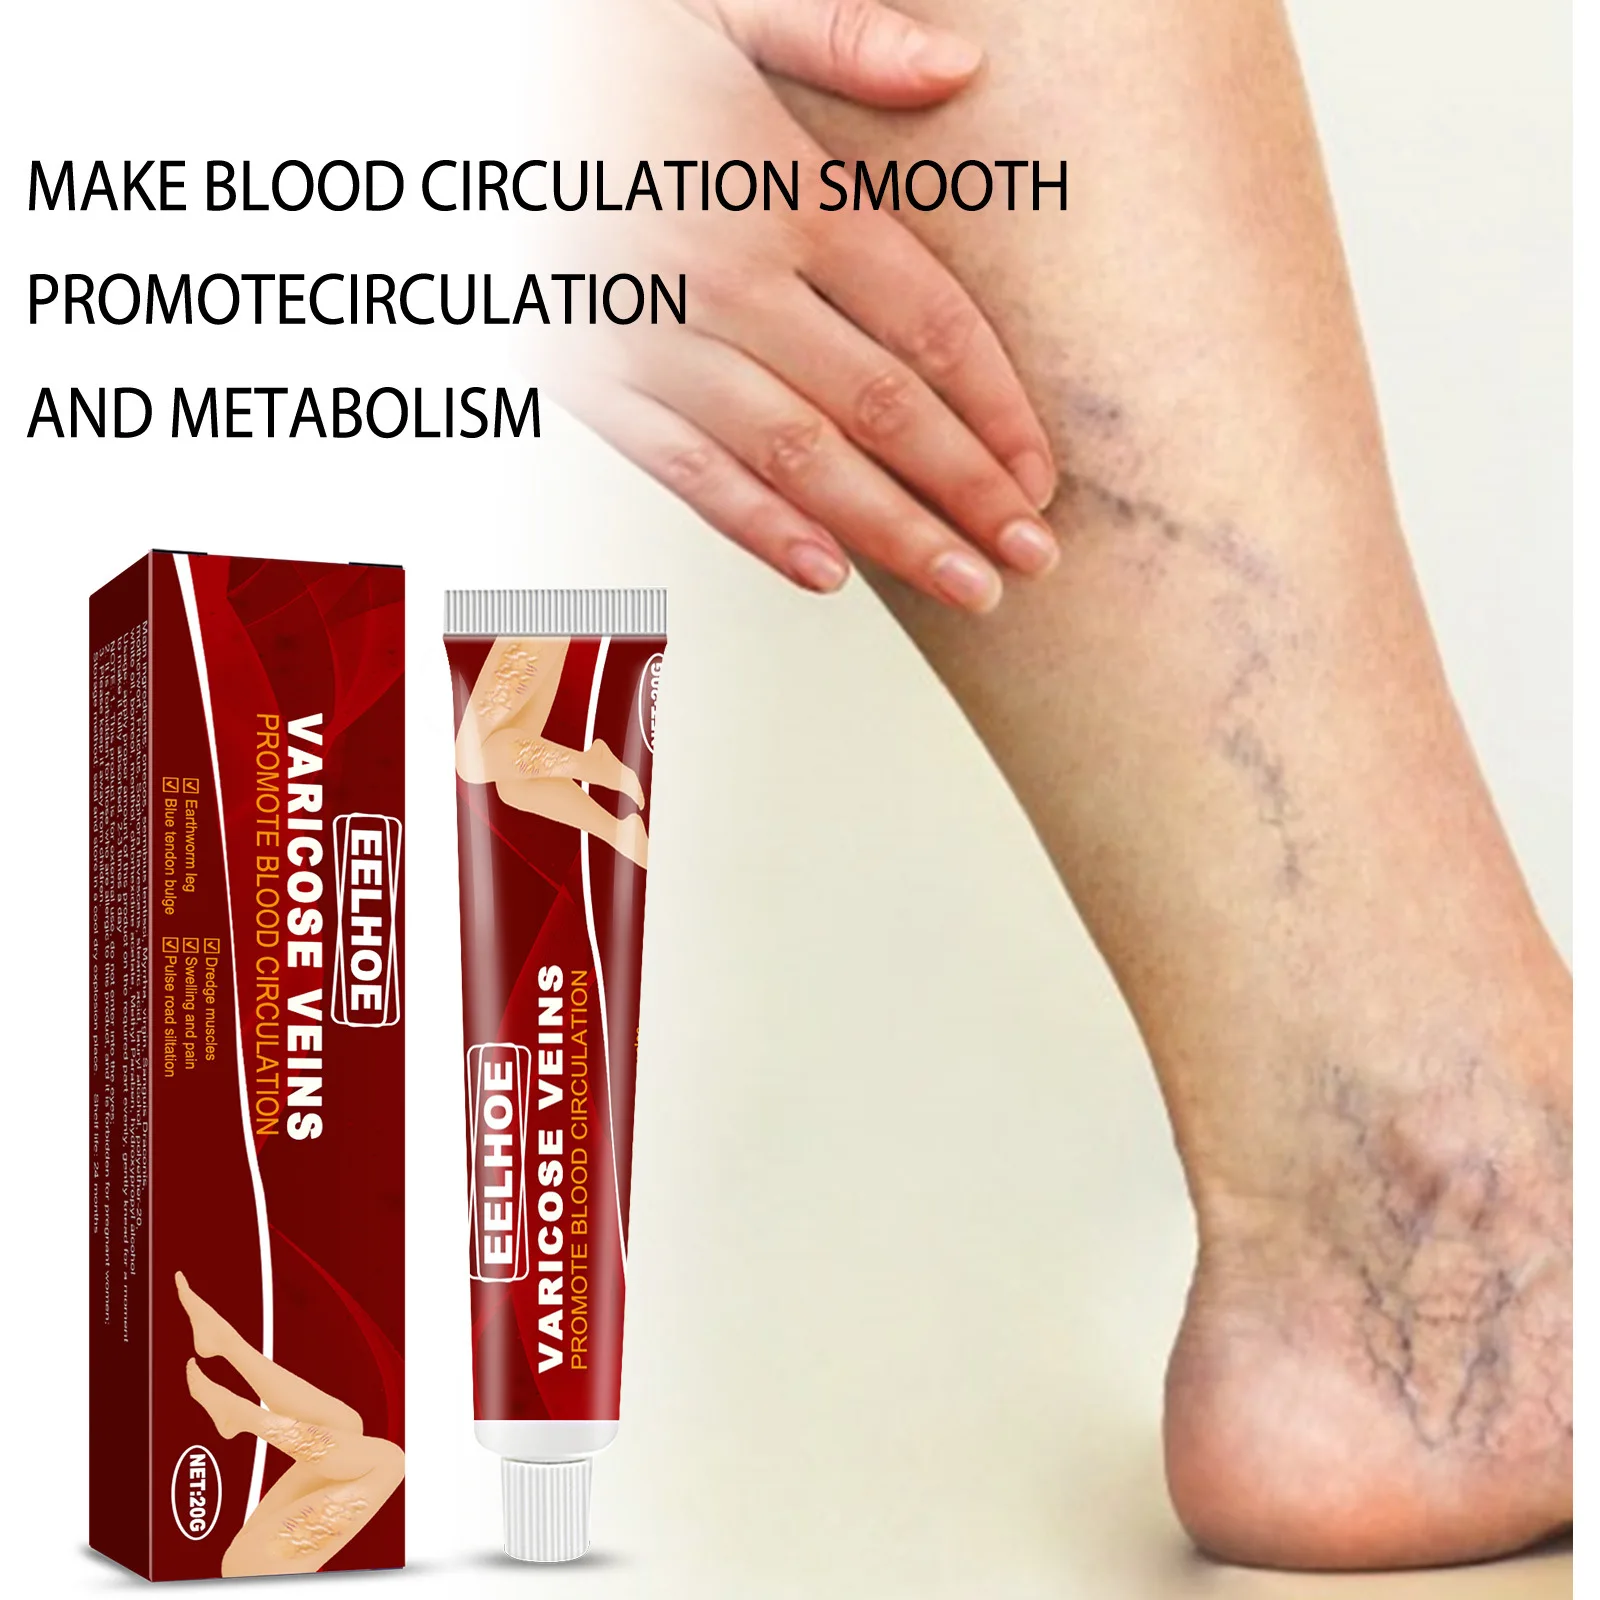 

EELOHOE Venous Massage Varicose Balm Relieves Bulge of Blood Vessels in the Legs Calf Swelling Earthworm Leg Vein Massage Balm